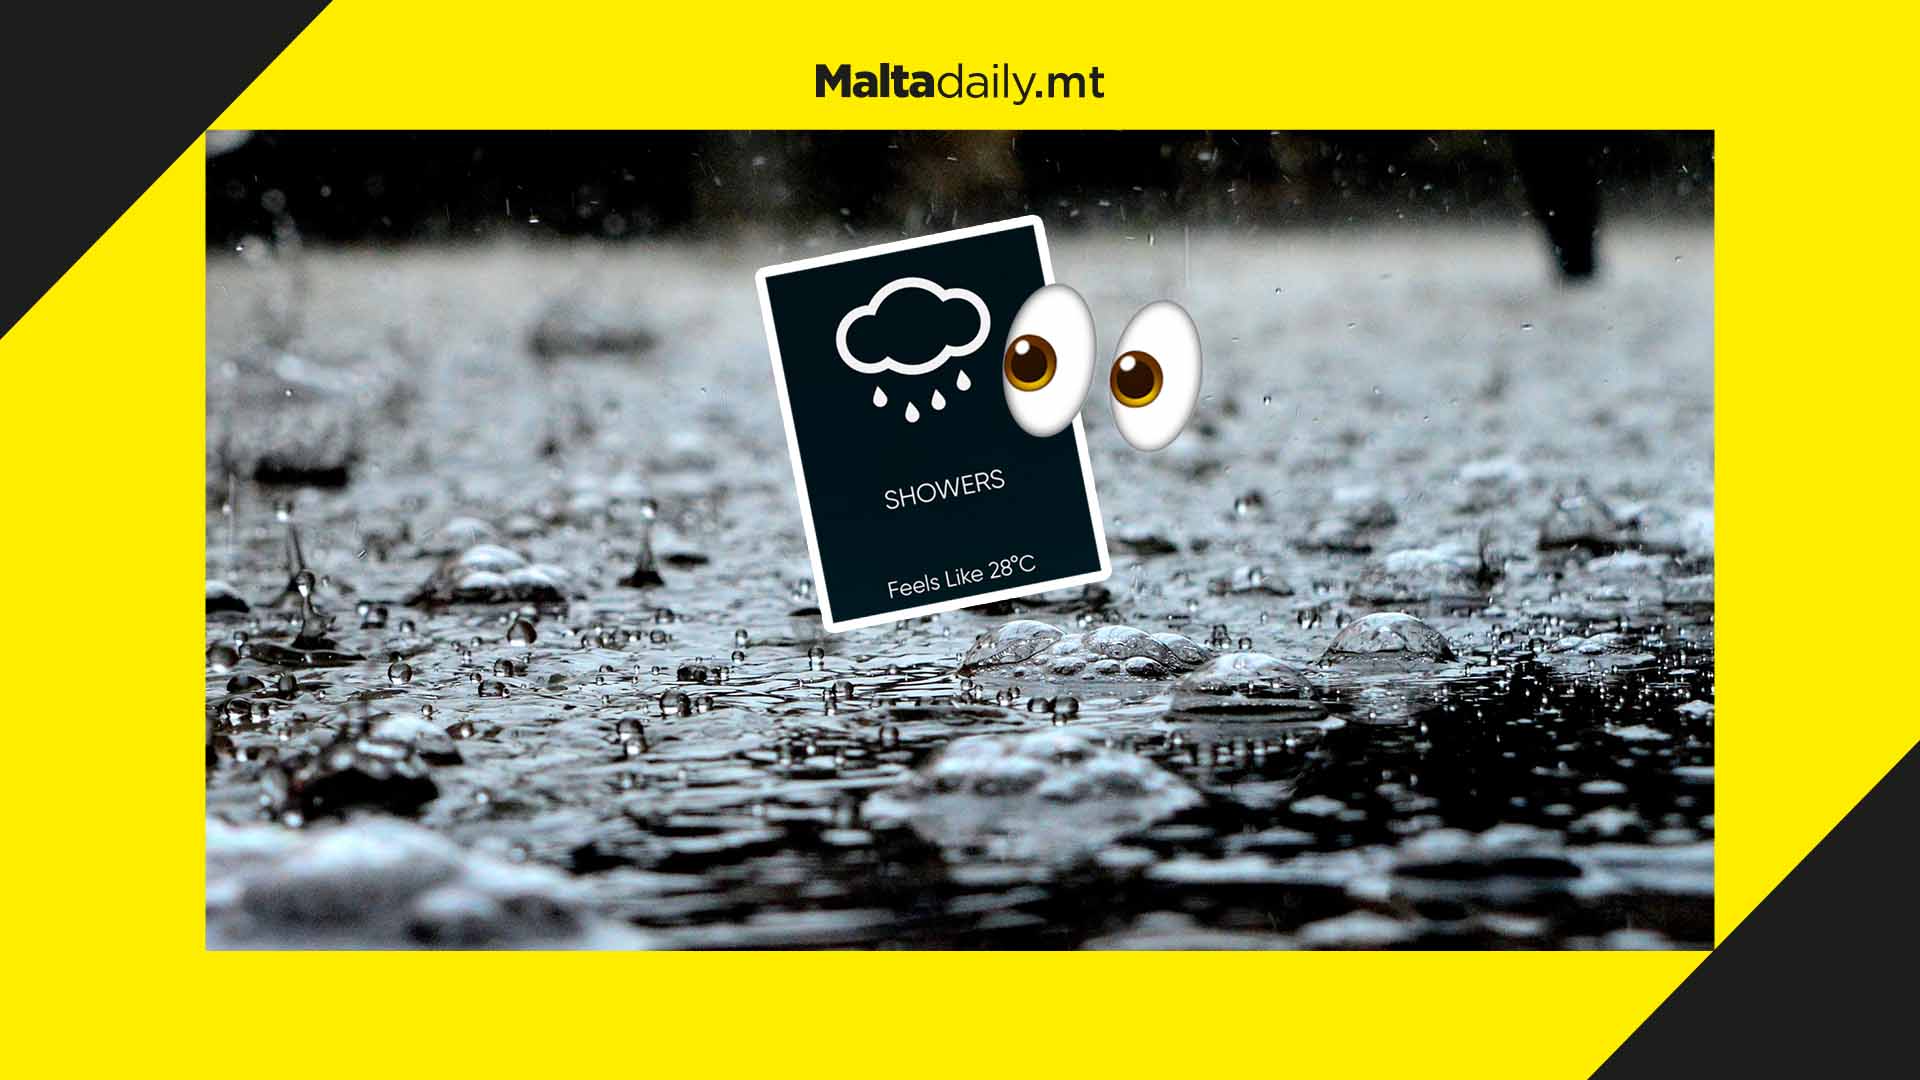 Let it rain! Rain showers and moderate winds expected in Malta today